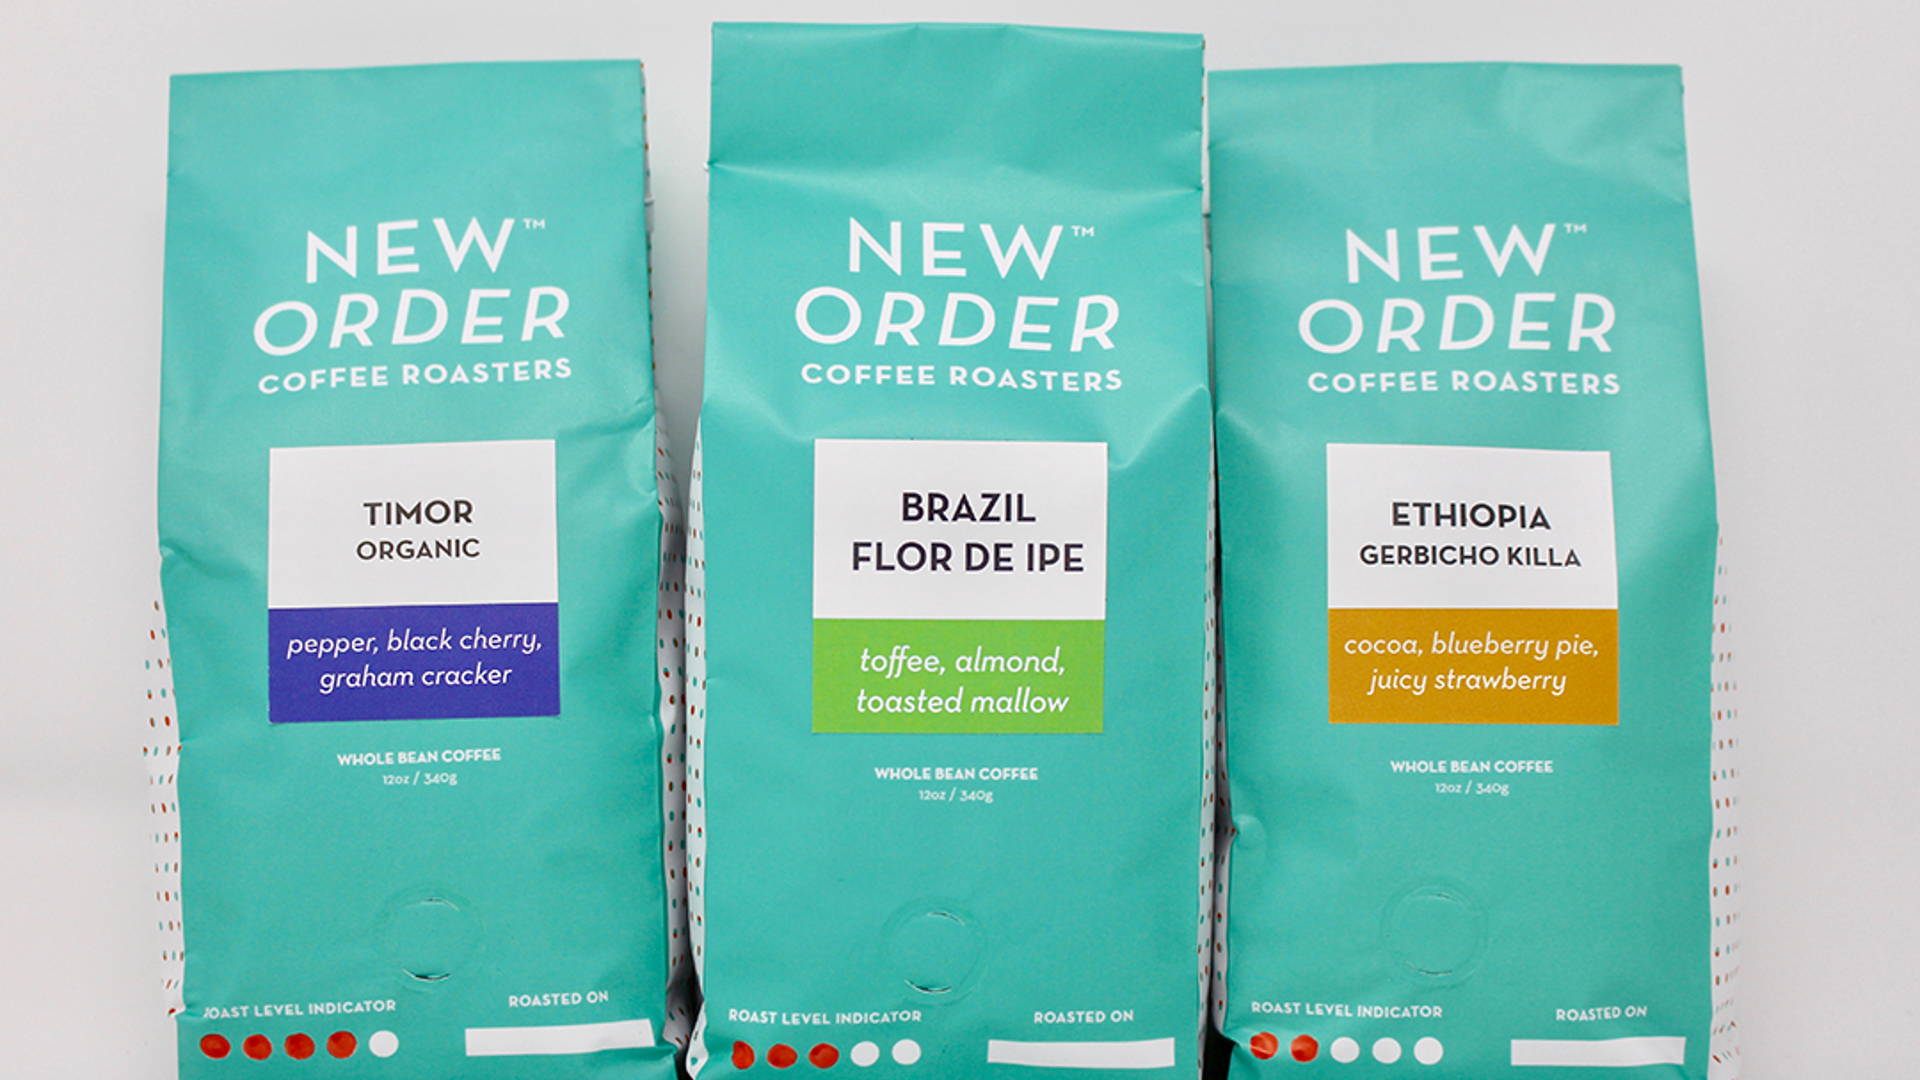 Featured image for The Colorful Look of This Coffee Brand Helps It Stand Out From Others